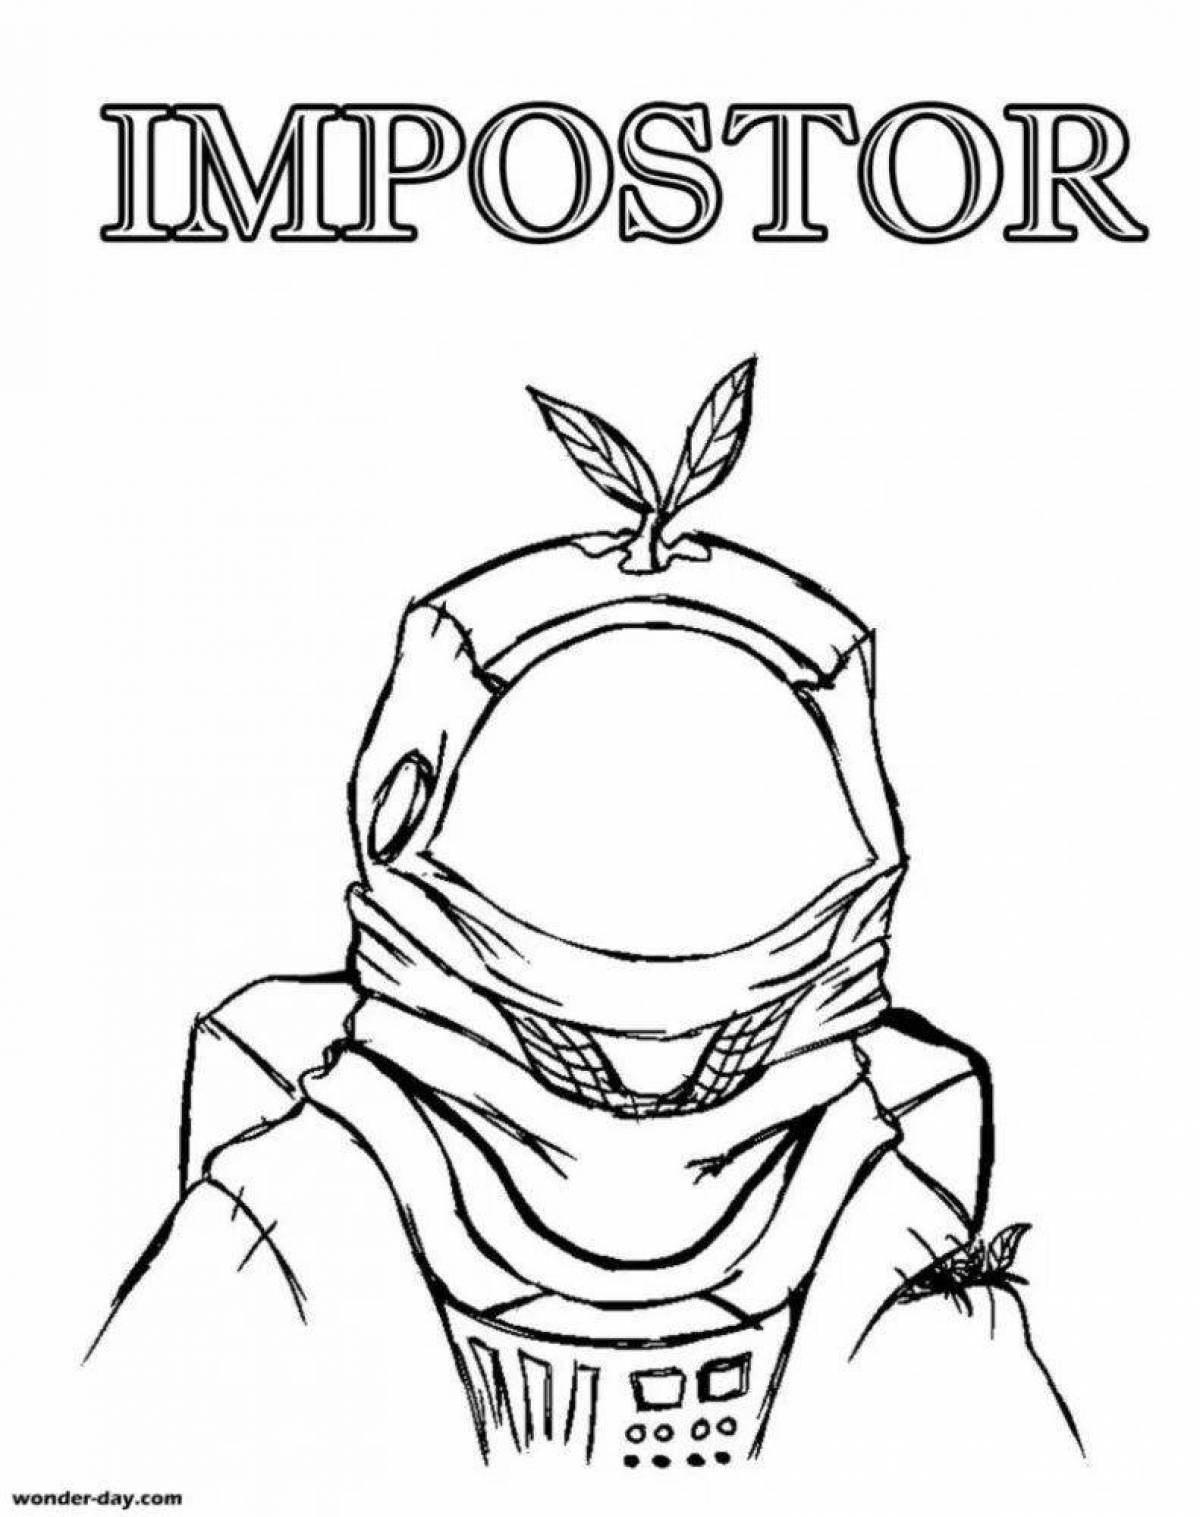 Playful amogus traitor coloring page